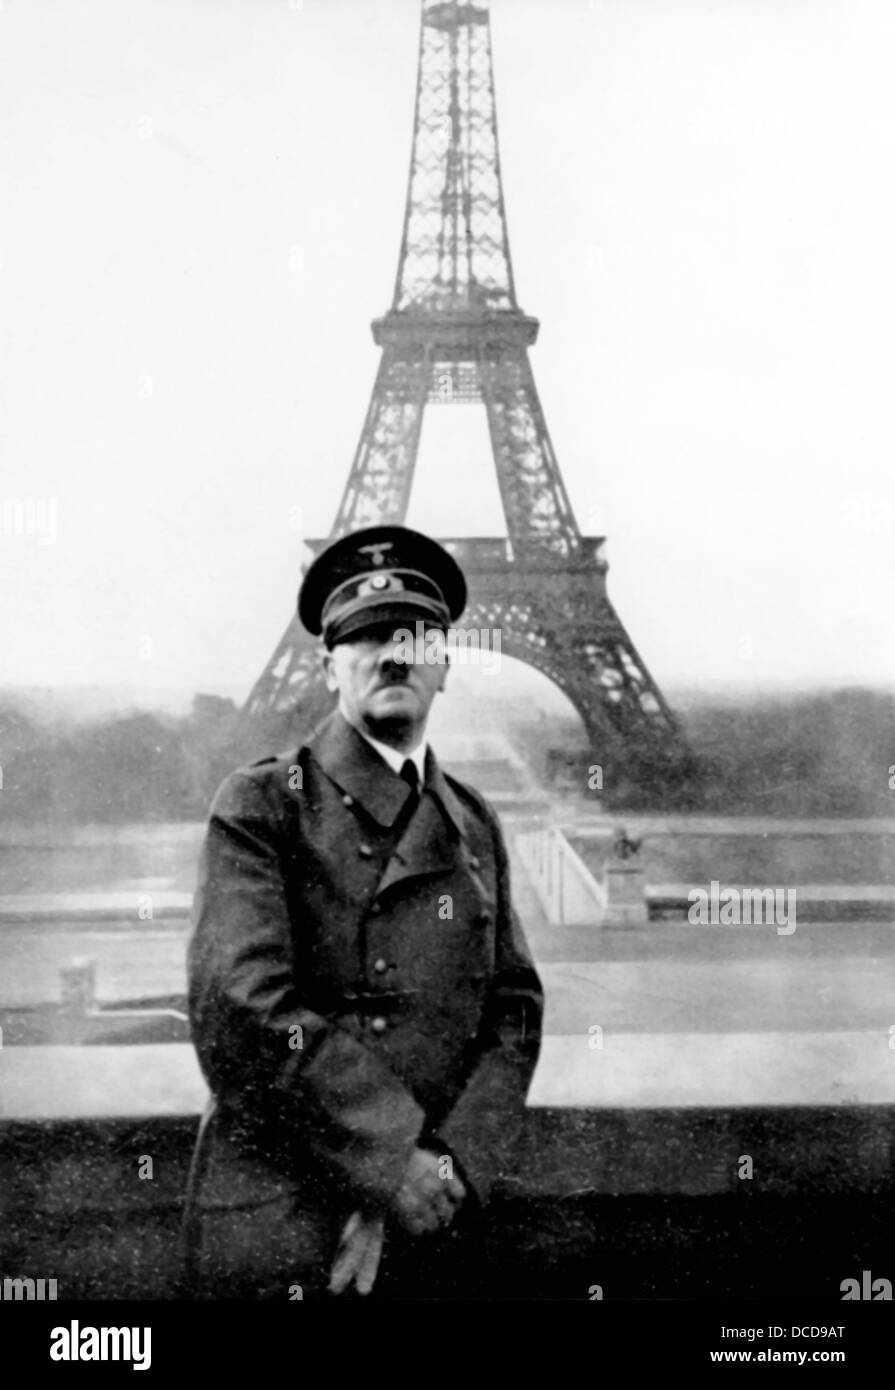 The image from the Nazi Propaganda! shows Adolf Hitler in front of the Eiffel Tower in Paris, France, which was occupied by German troops, on 28 June 1940. Photo: Berliner Verlag/Archiv Stock Photo